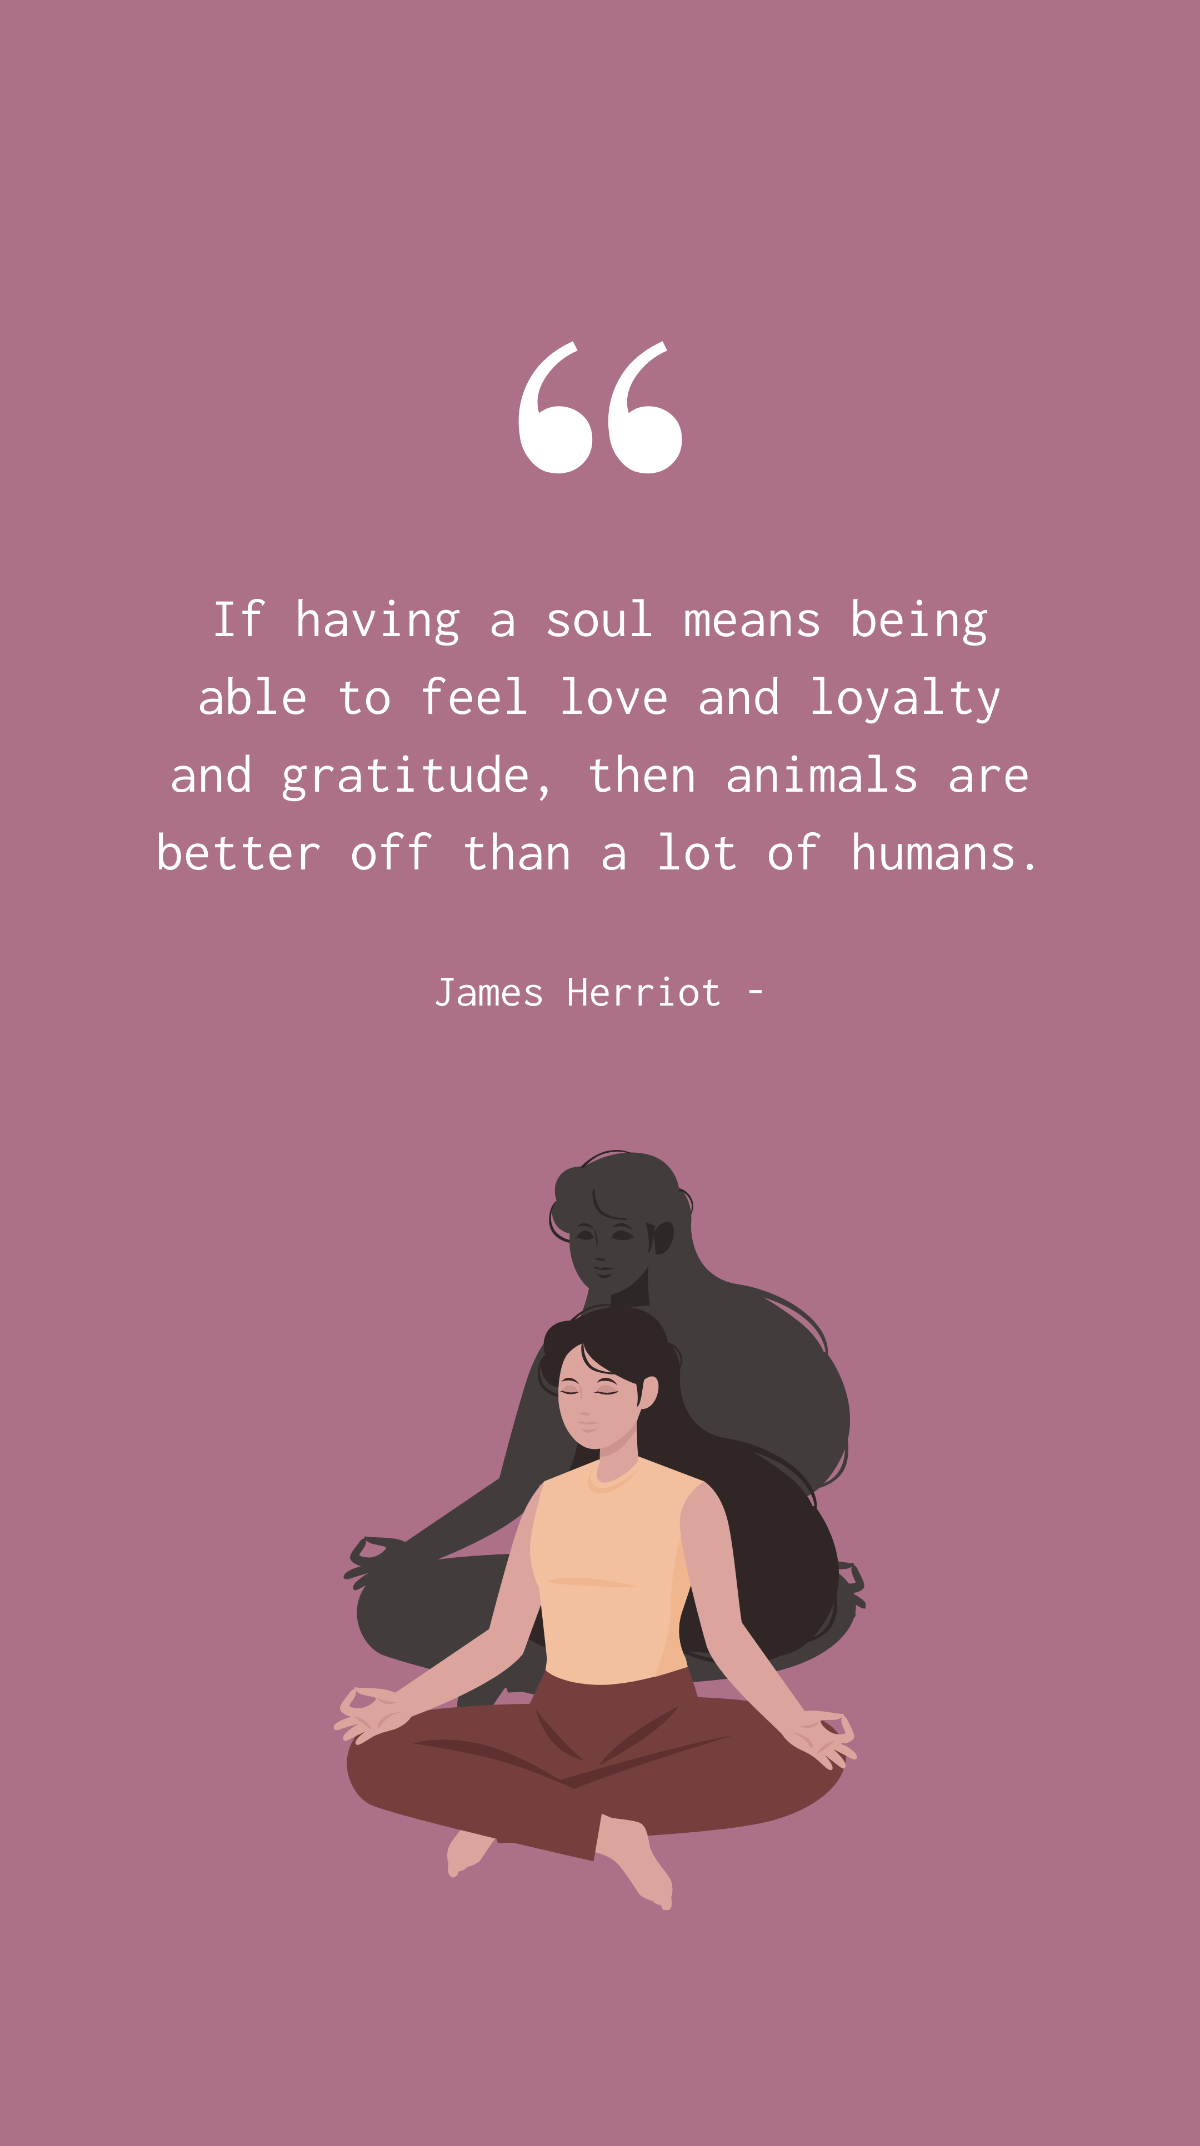 James Herriot - If having a soul means being able to feel love and loyalty and gratitude, then animals are better off than a lot of humans. Template